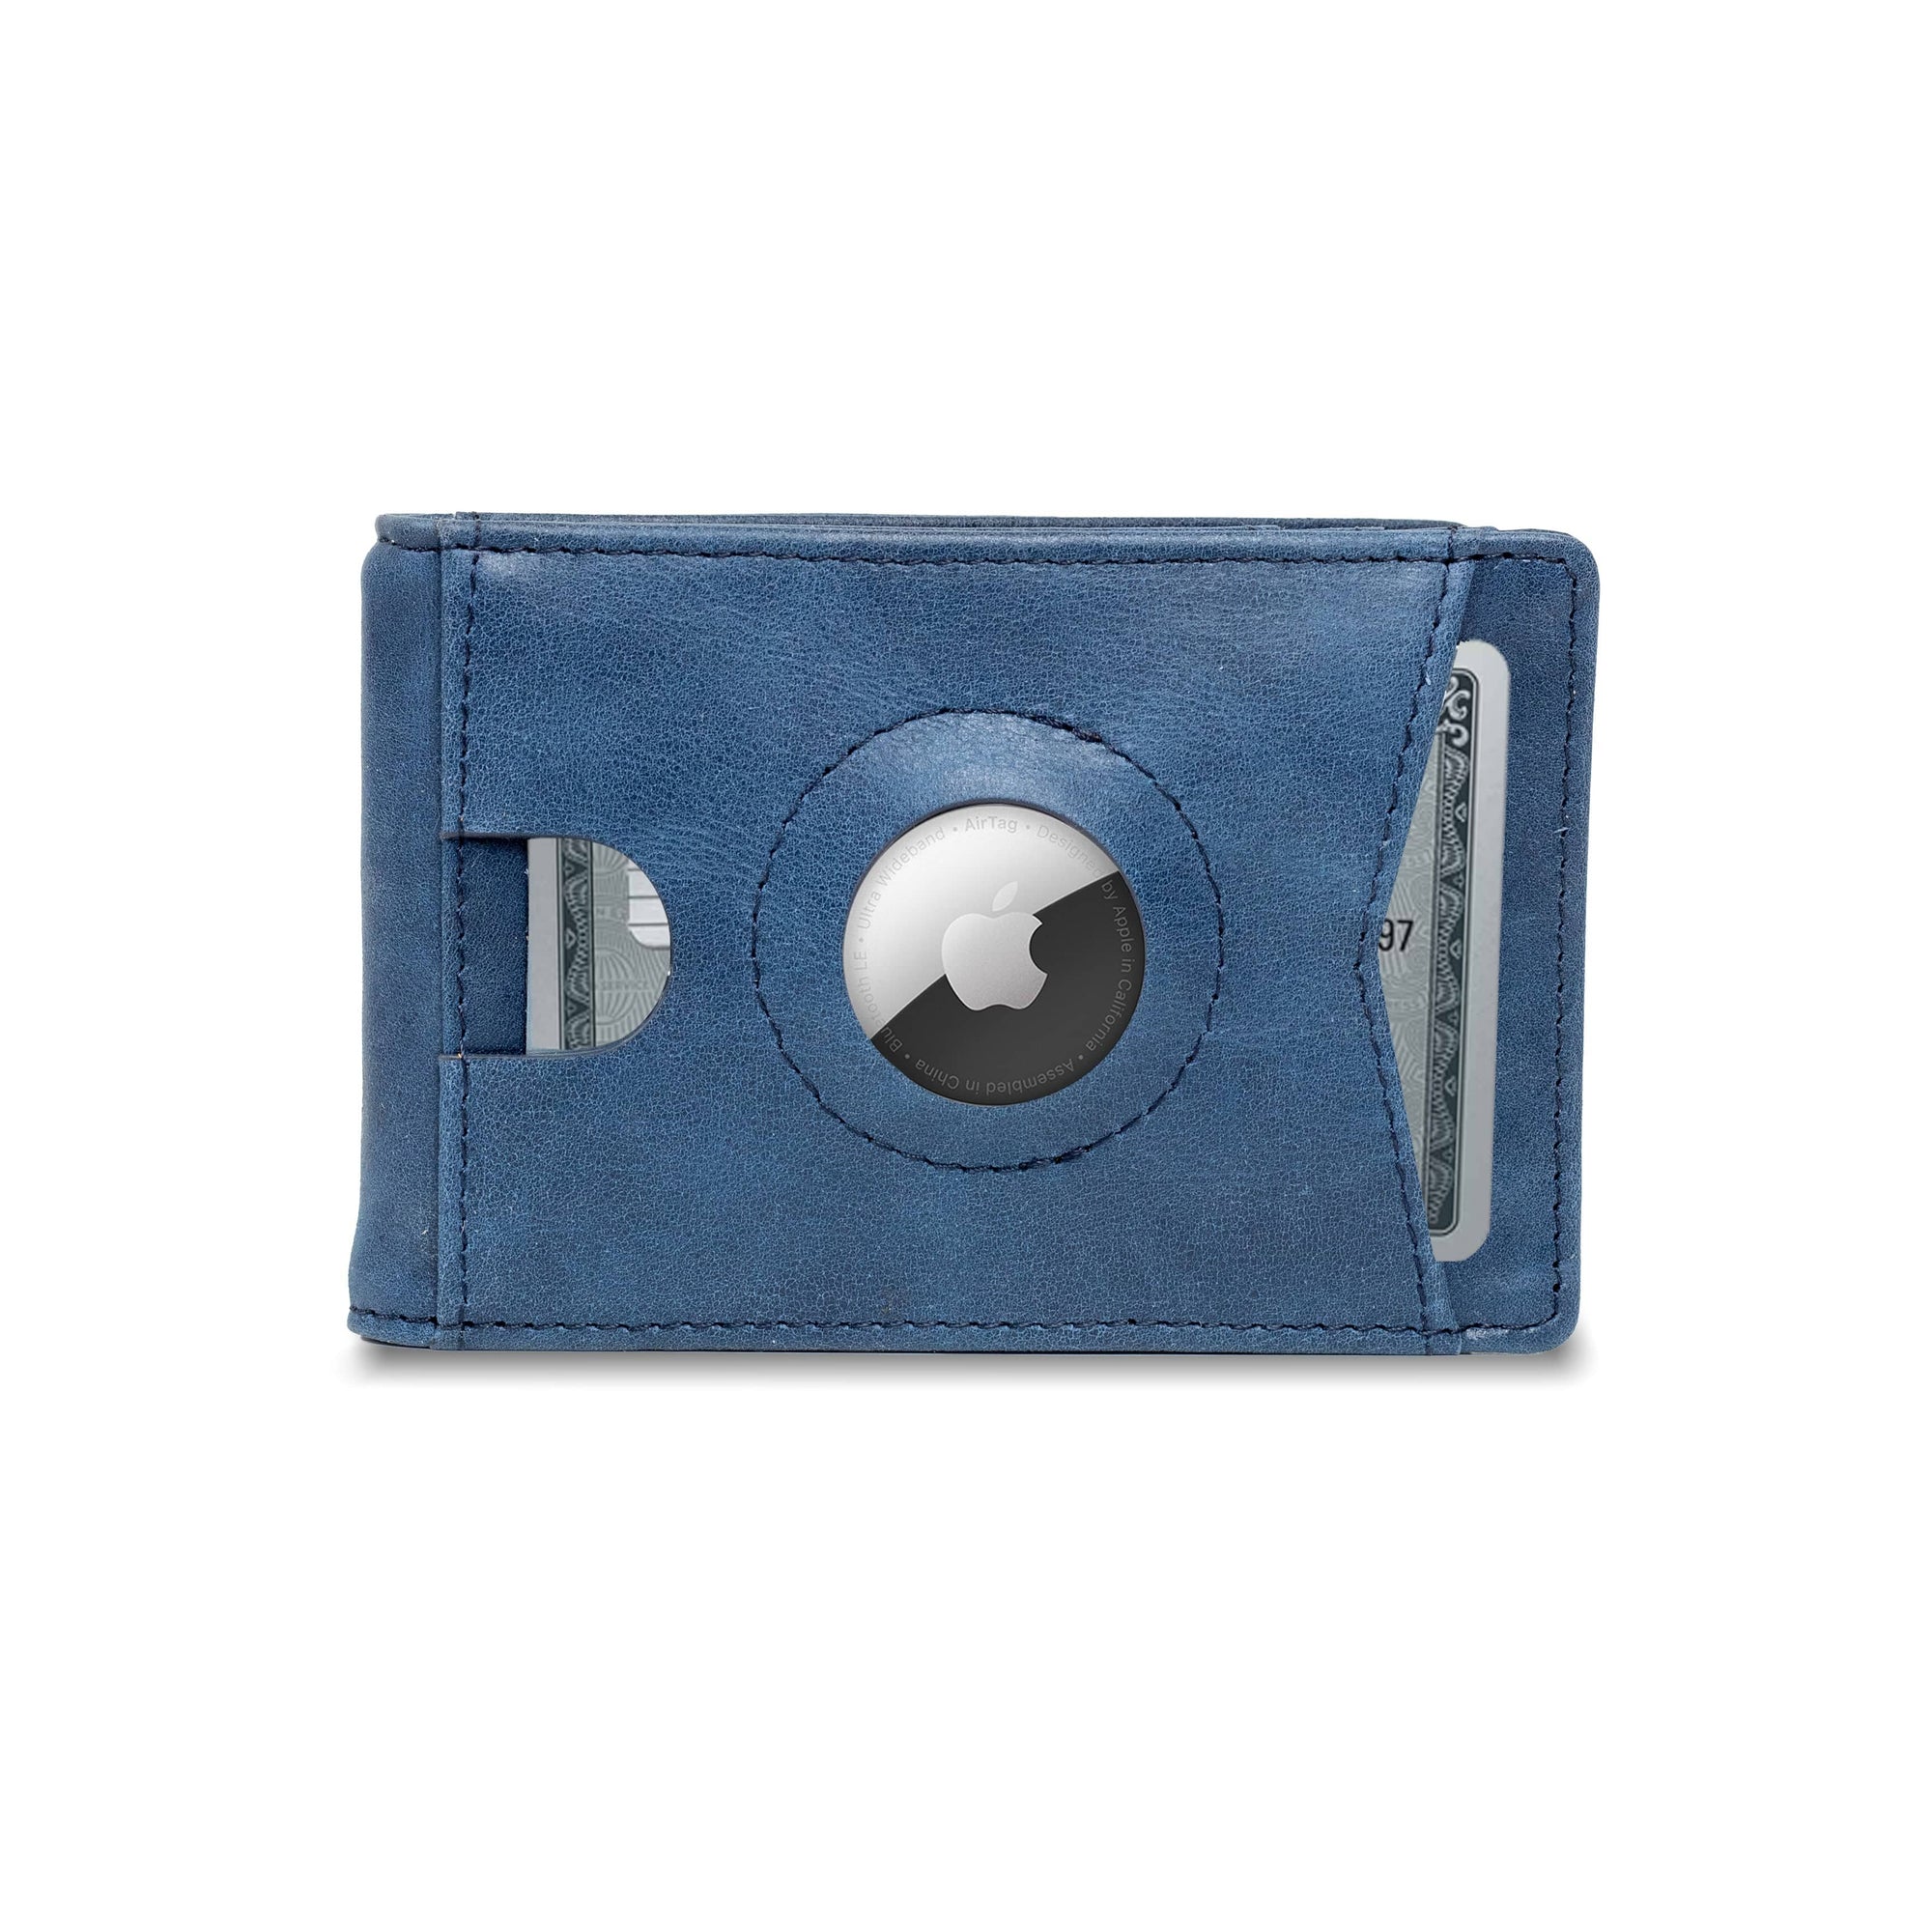 Navy The Bifold Monetial | AirTag Premium Leather Wallet | RFID Blocking | Slim Leather Wallet